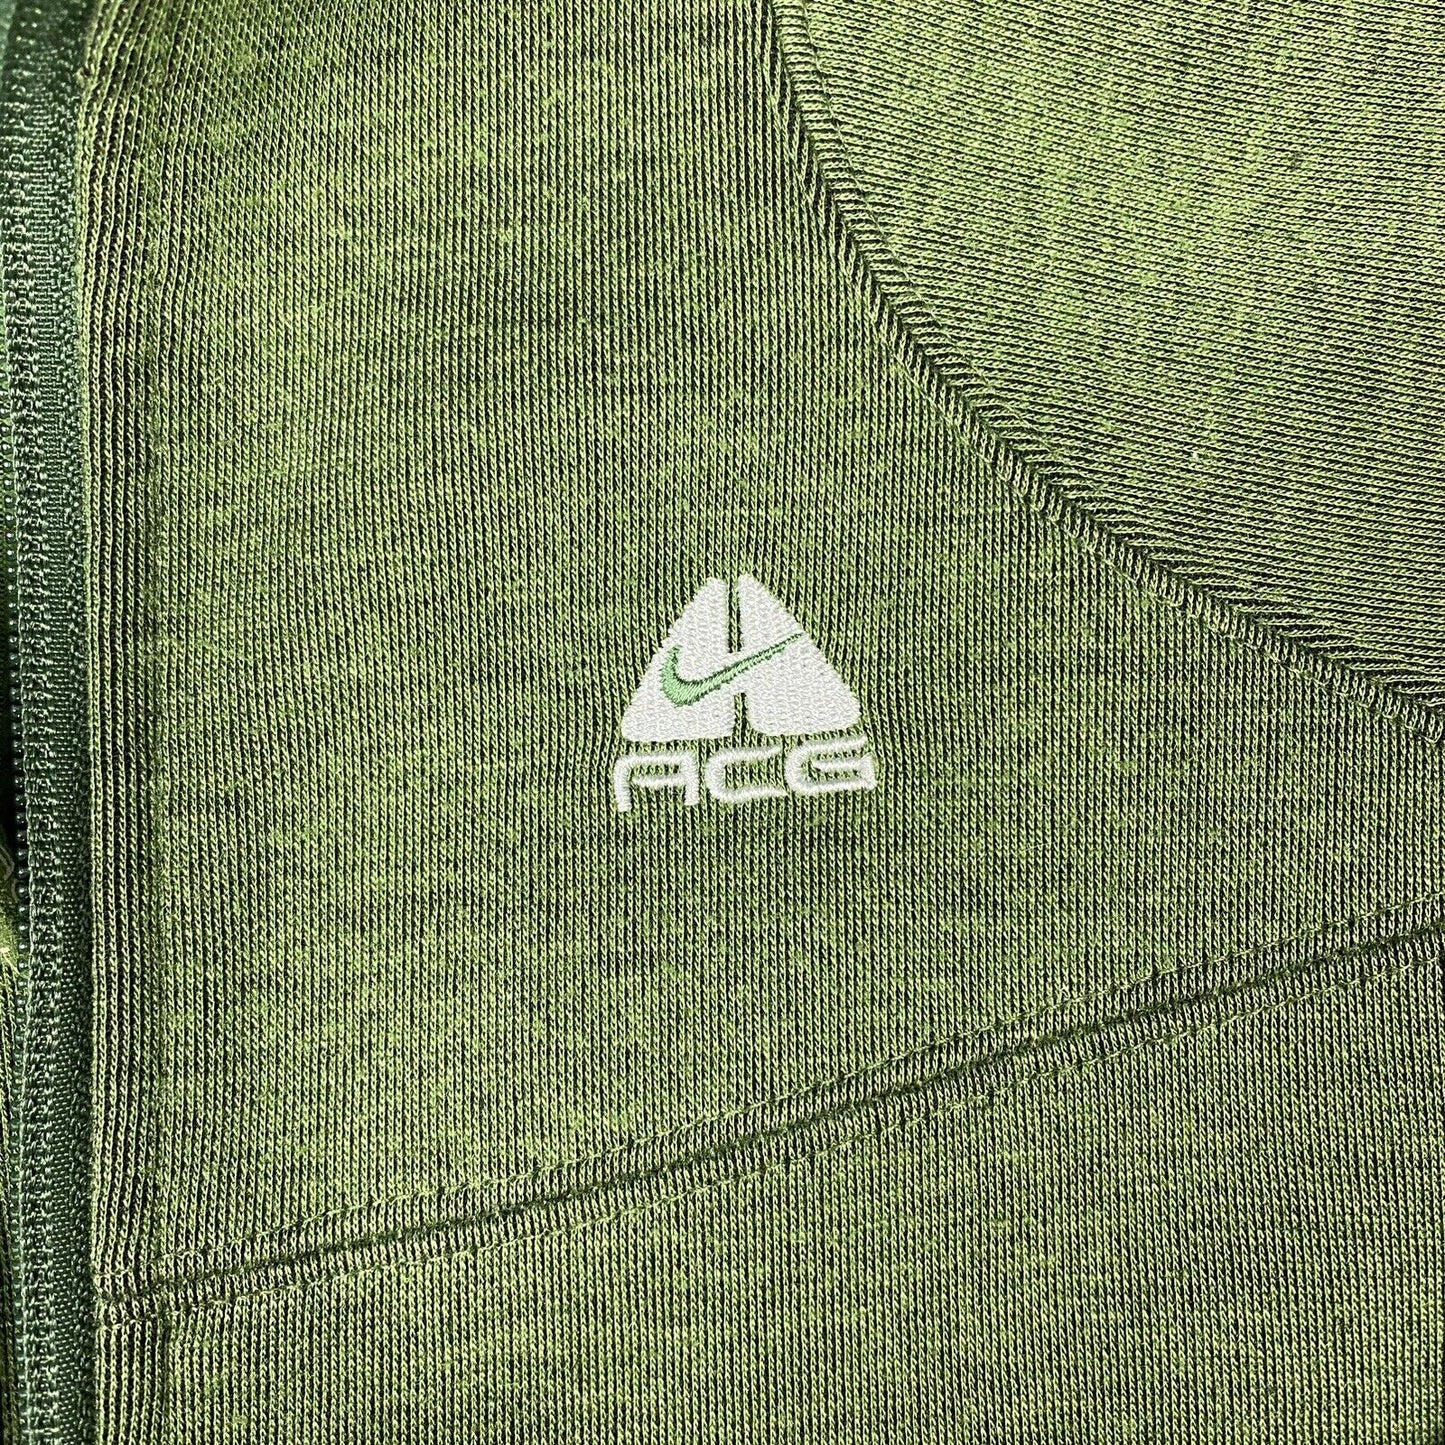 Nike Acg All Conditions Gear Green Zip Up Jacket